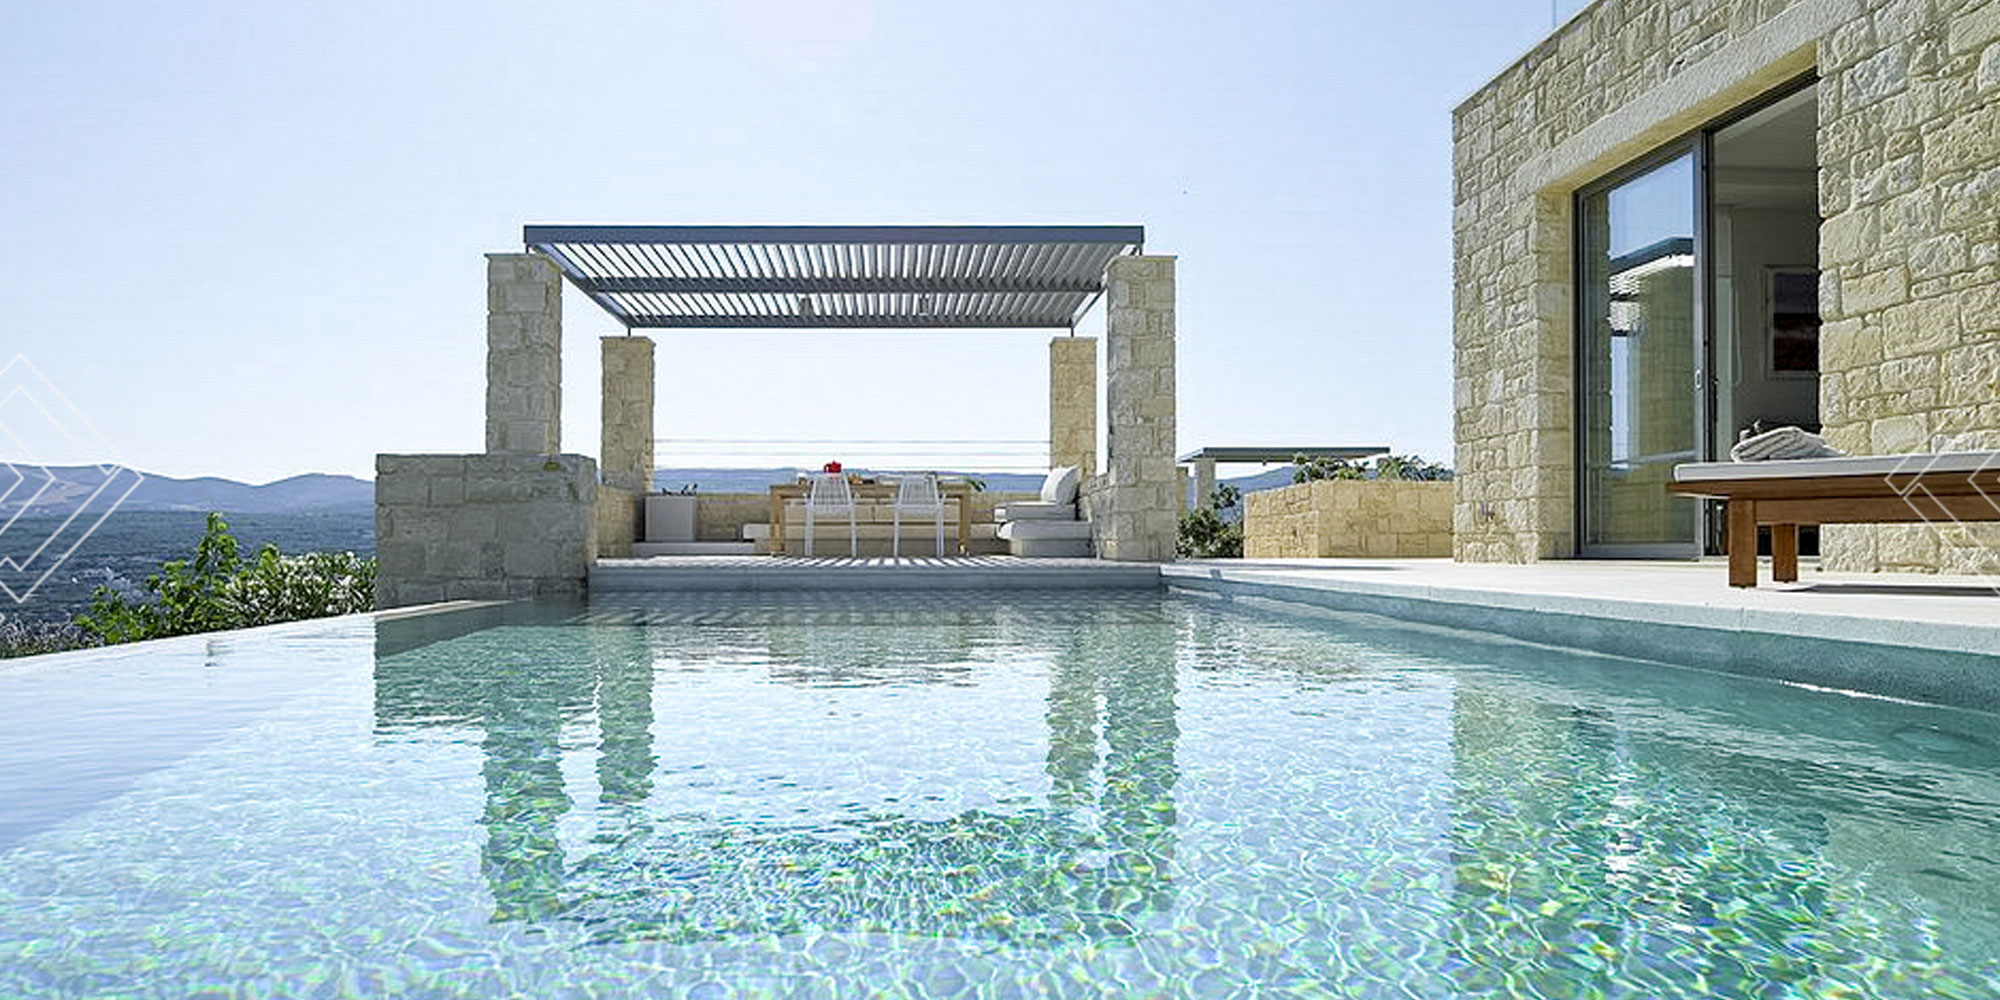 villas with pools in crete: discover the paradise-vivestia | risk-free villas, hotels and cruises in vr